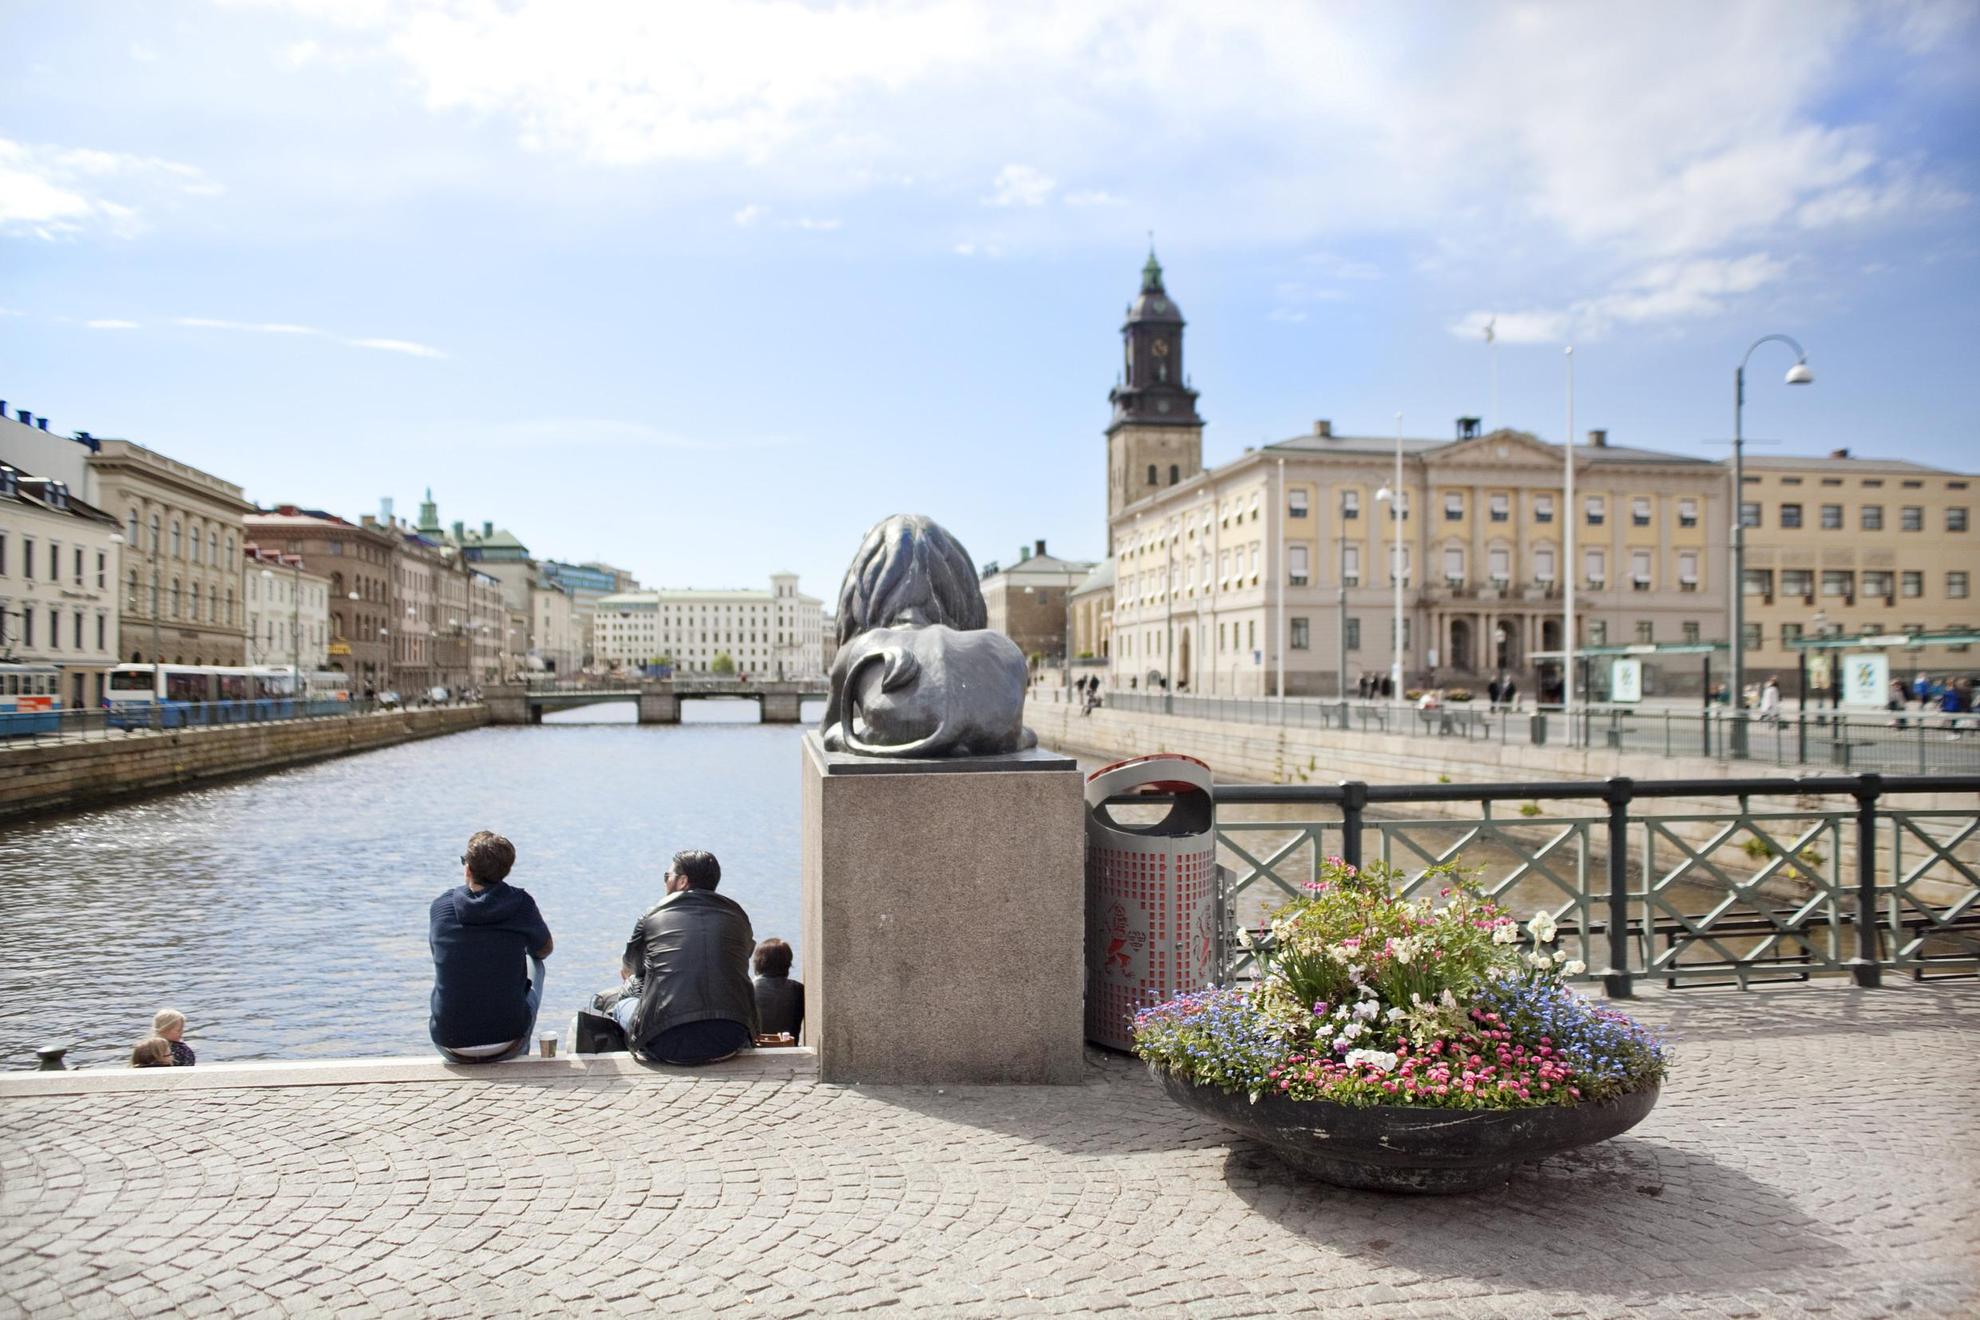 Two people sit on Lejontrappan in Brunnsparken. Gothenburg City Hall is visible in the background.